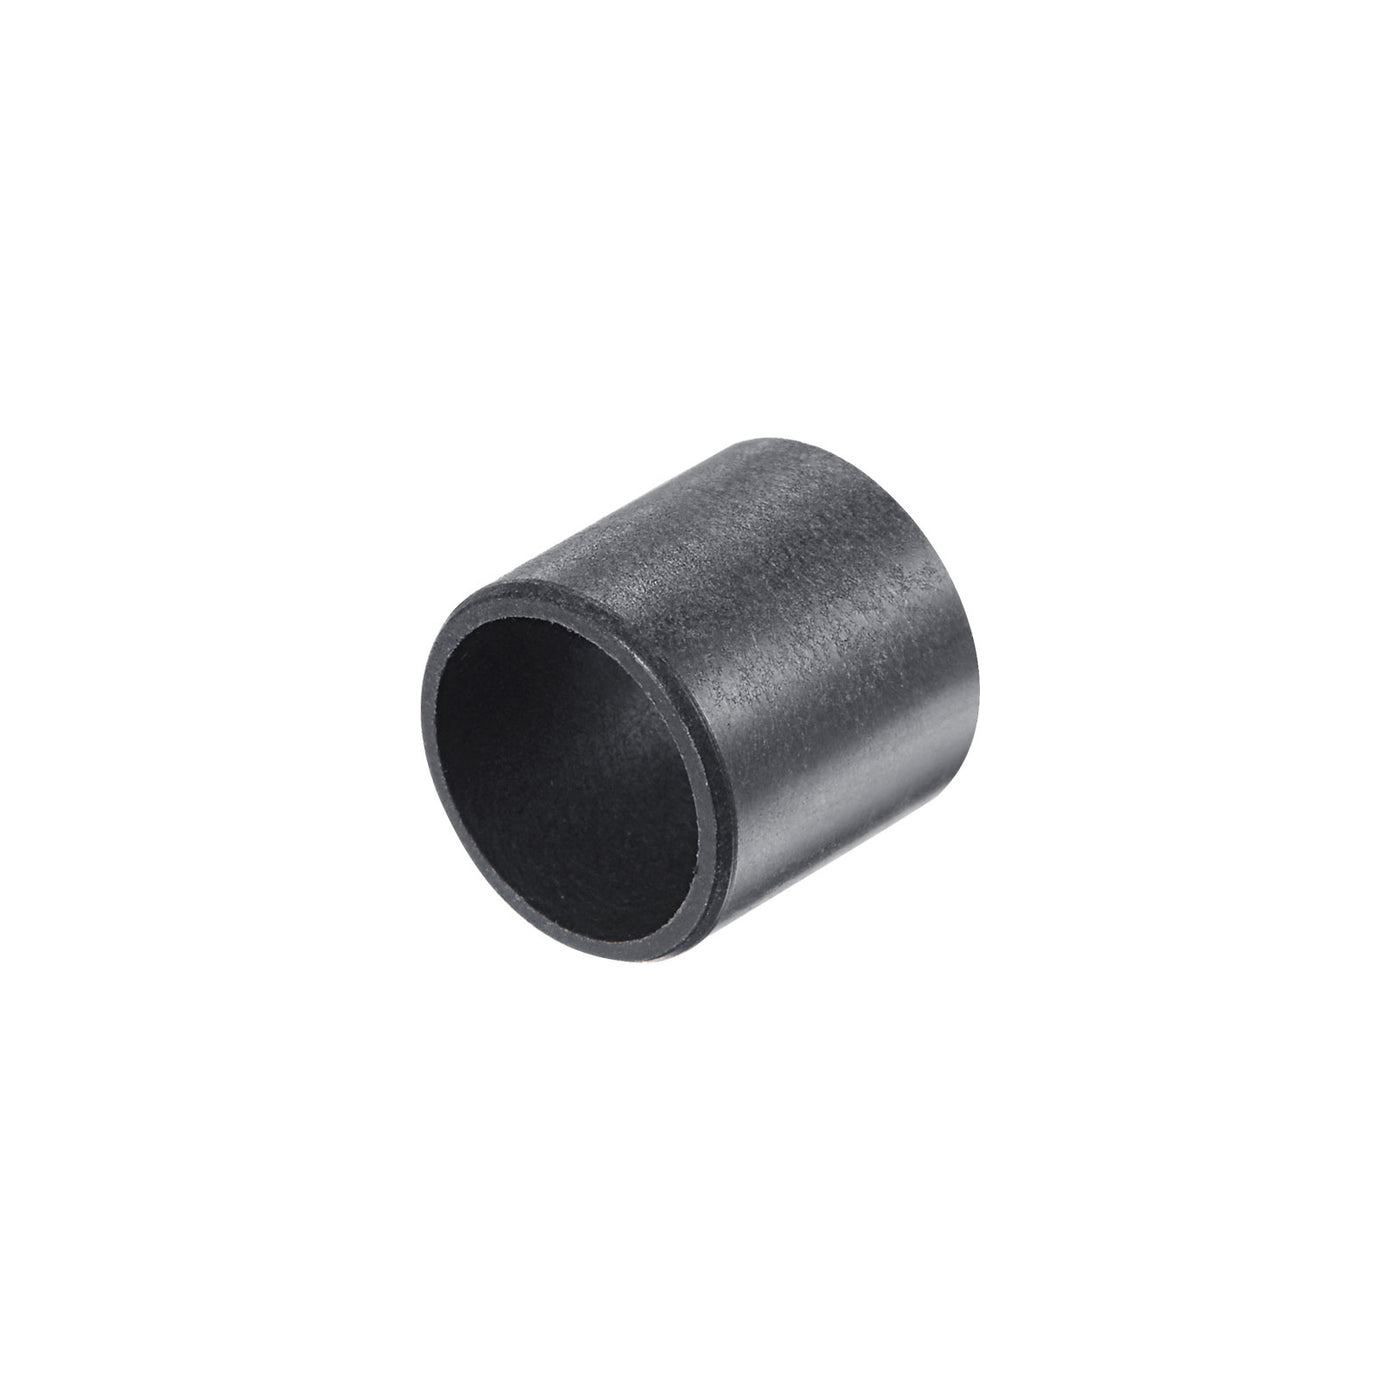 uxcell Uxcell Sleeve Bearings 10mmx12mmx10mm POM Wrapped Oilless Bushings Black